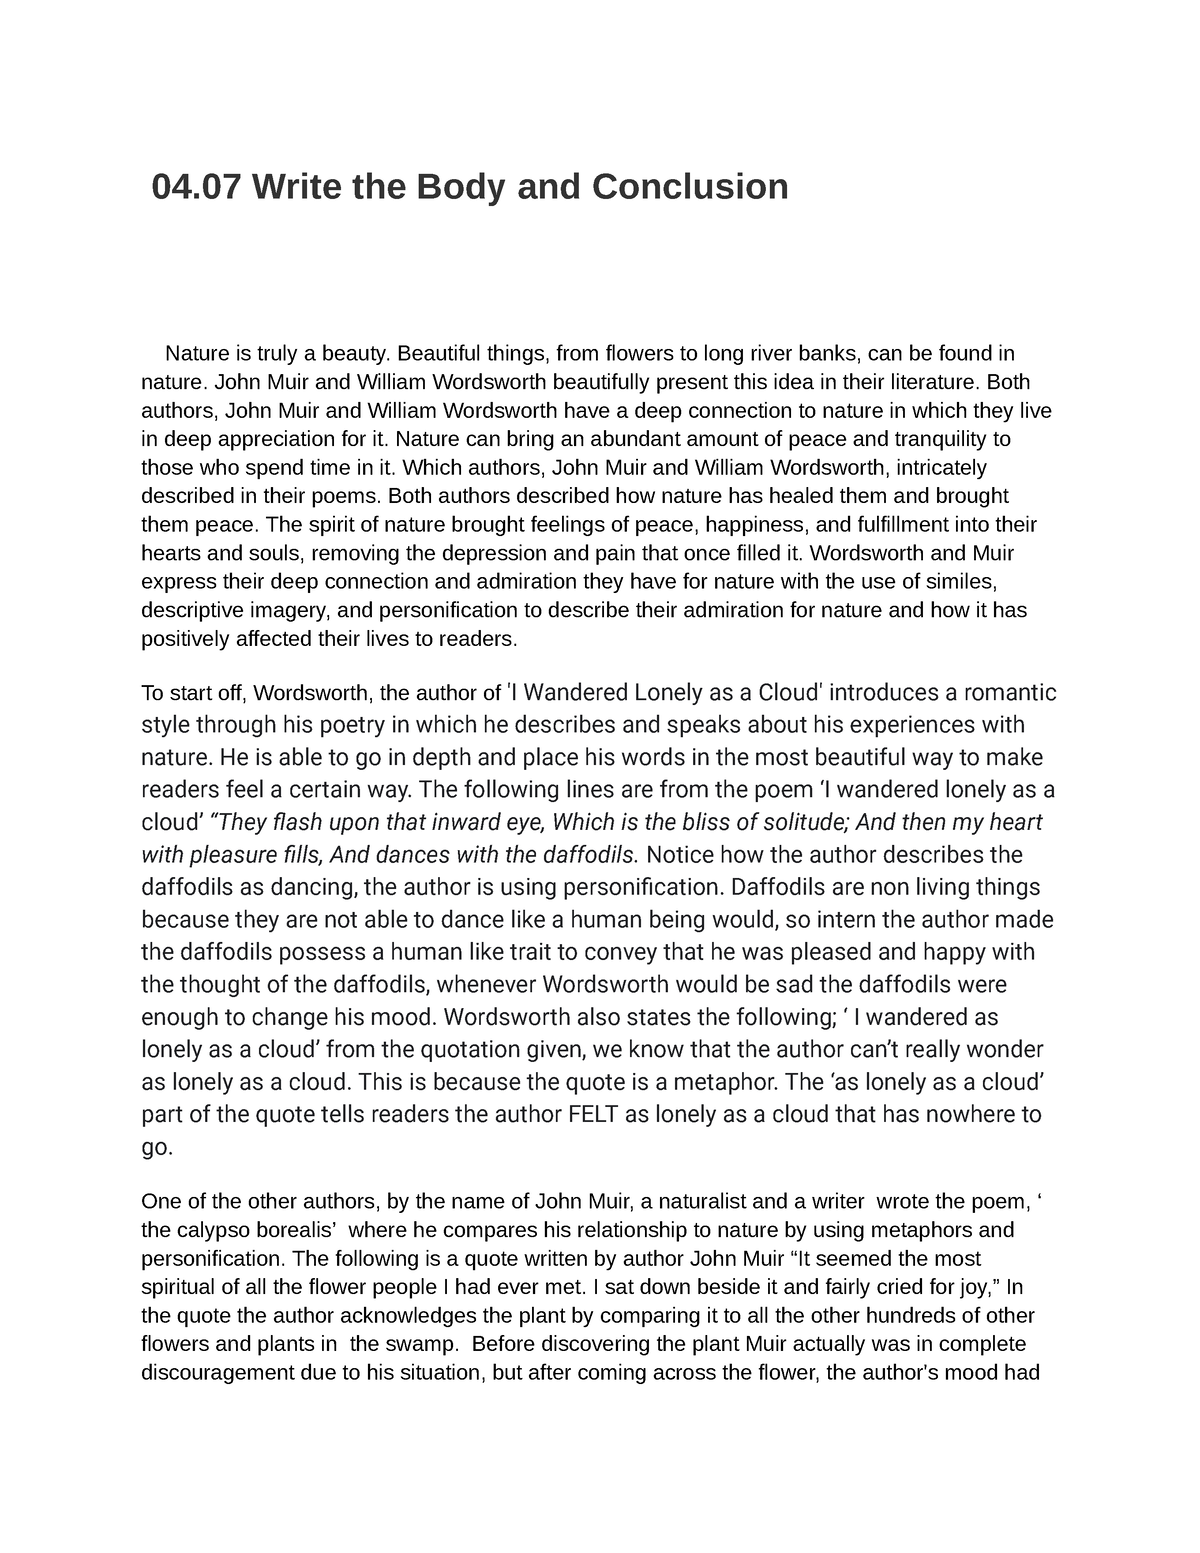 assignment 04 07 write the body and conclusion